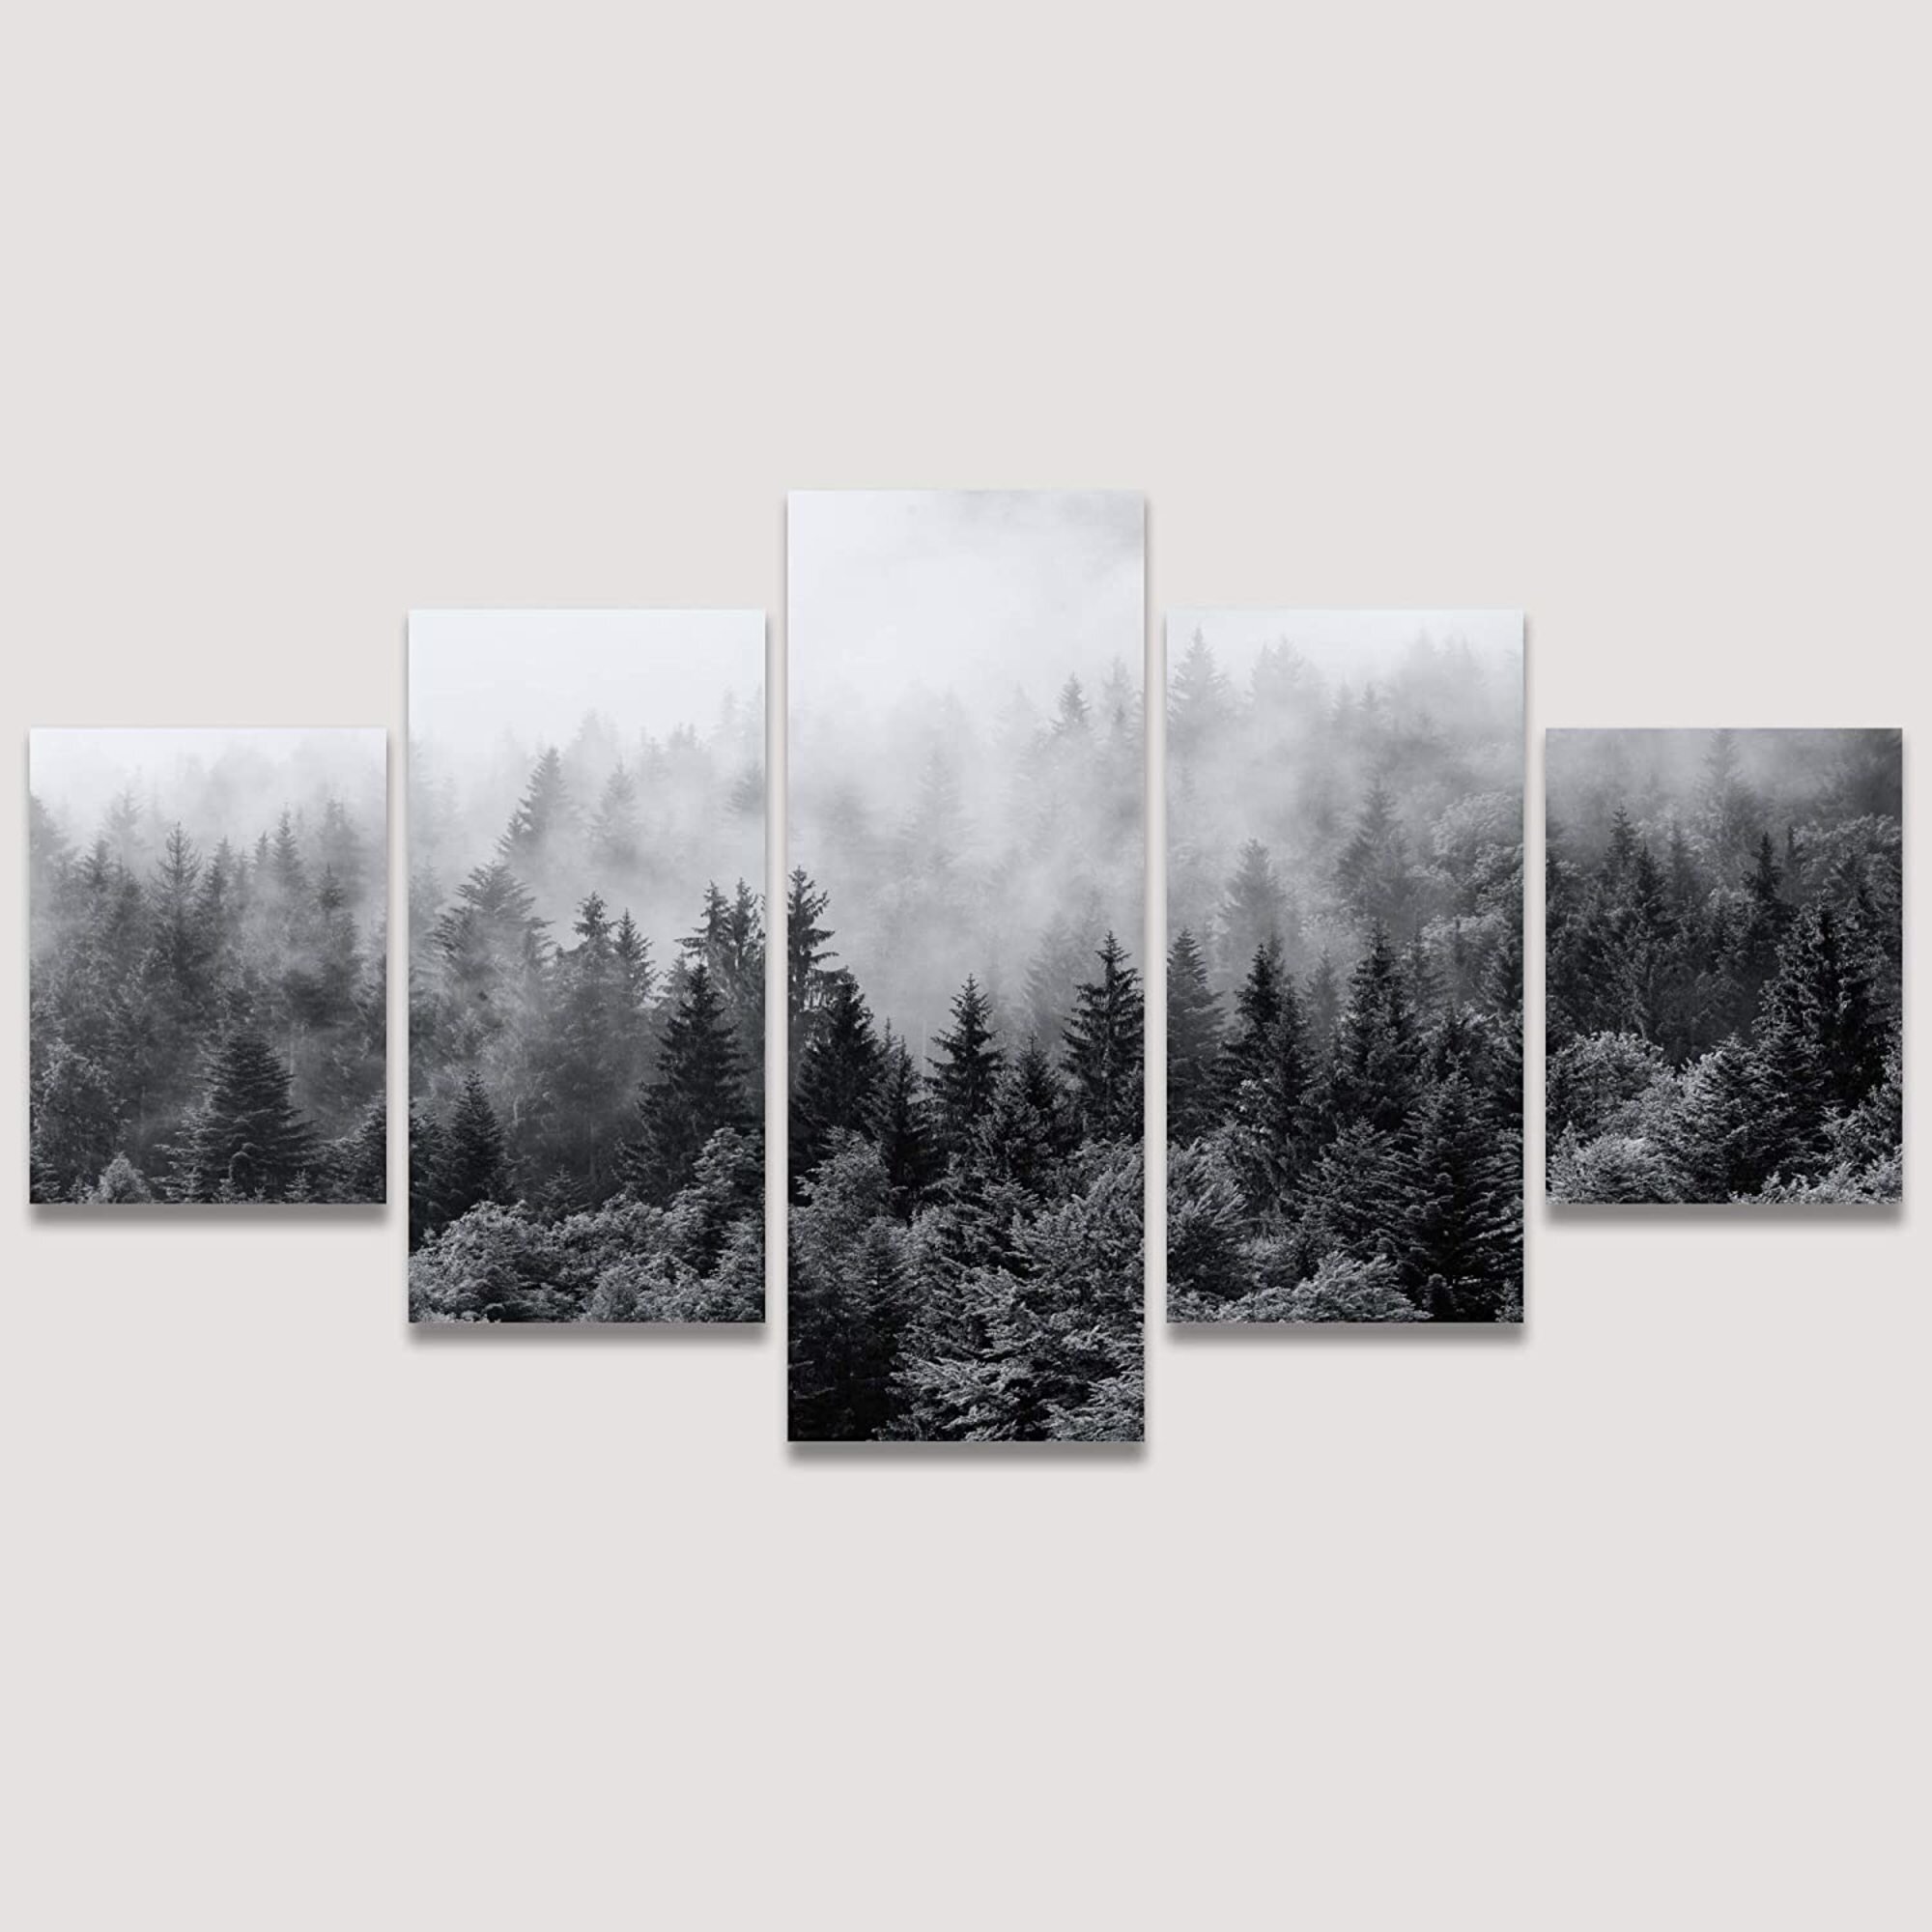 SIGNLEADER Large Canvas Wall Art Print Misty Forests Of Evergreen  Coniferous Trees In An Ethereal Landscape For Living Room Bedroom Office On  Canvas Pieces Print Wayfair